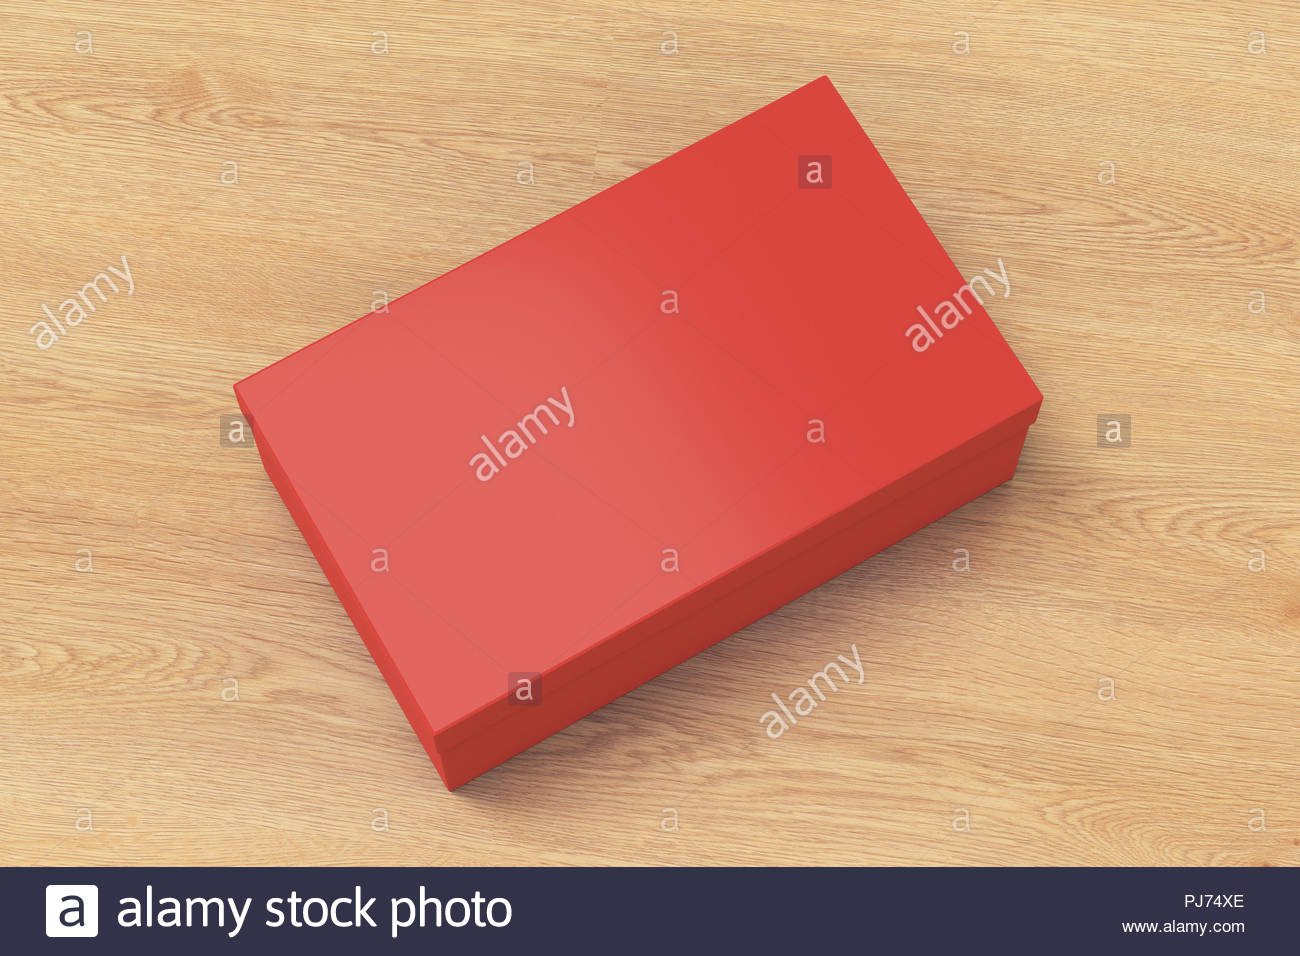 Red Shoe Box Container On Wooden Background. Packaging Regarding Nike Shoe Box Label Template